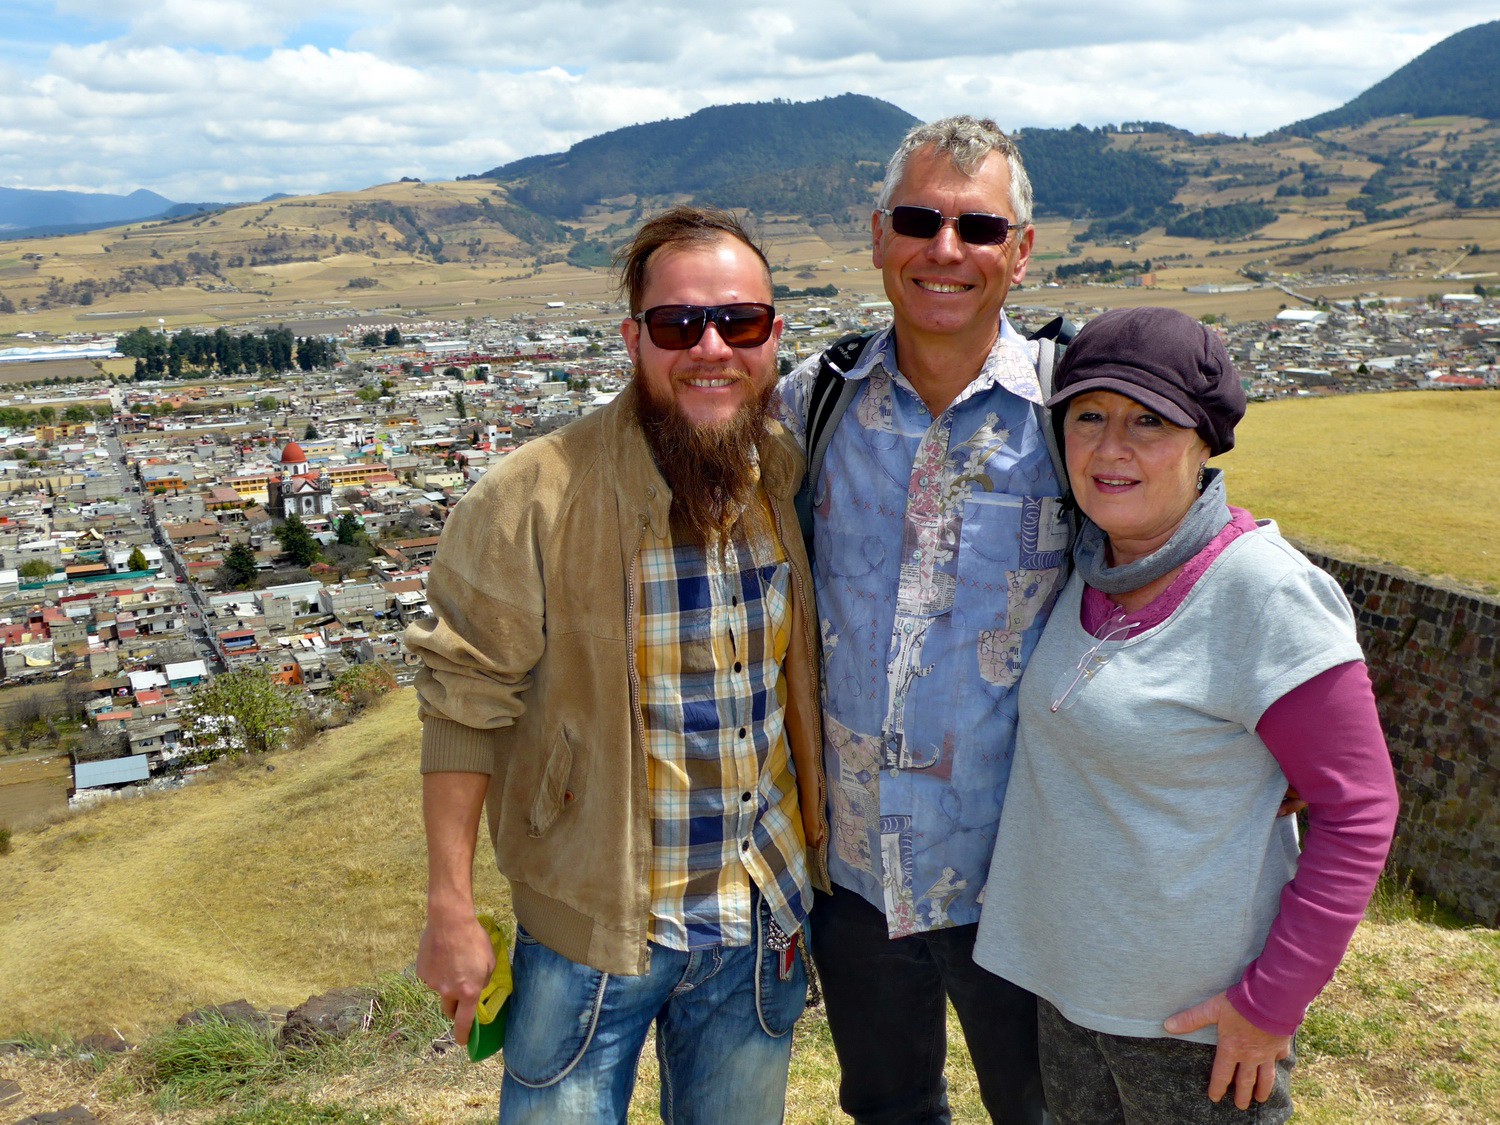 Poldi, Alfred and Marion with the town Tenango in the background